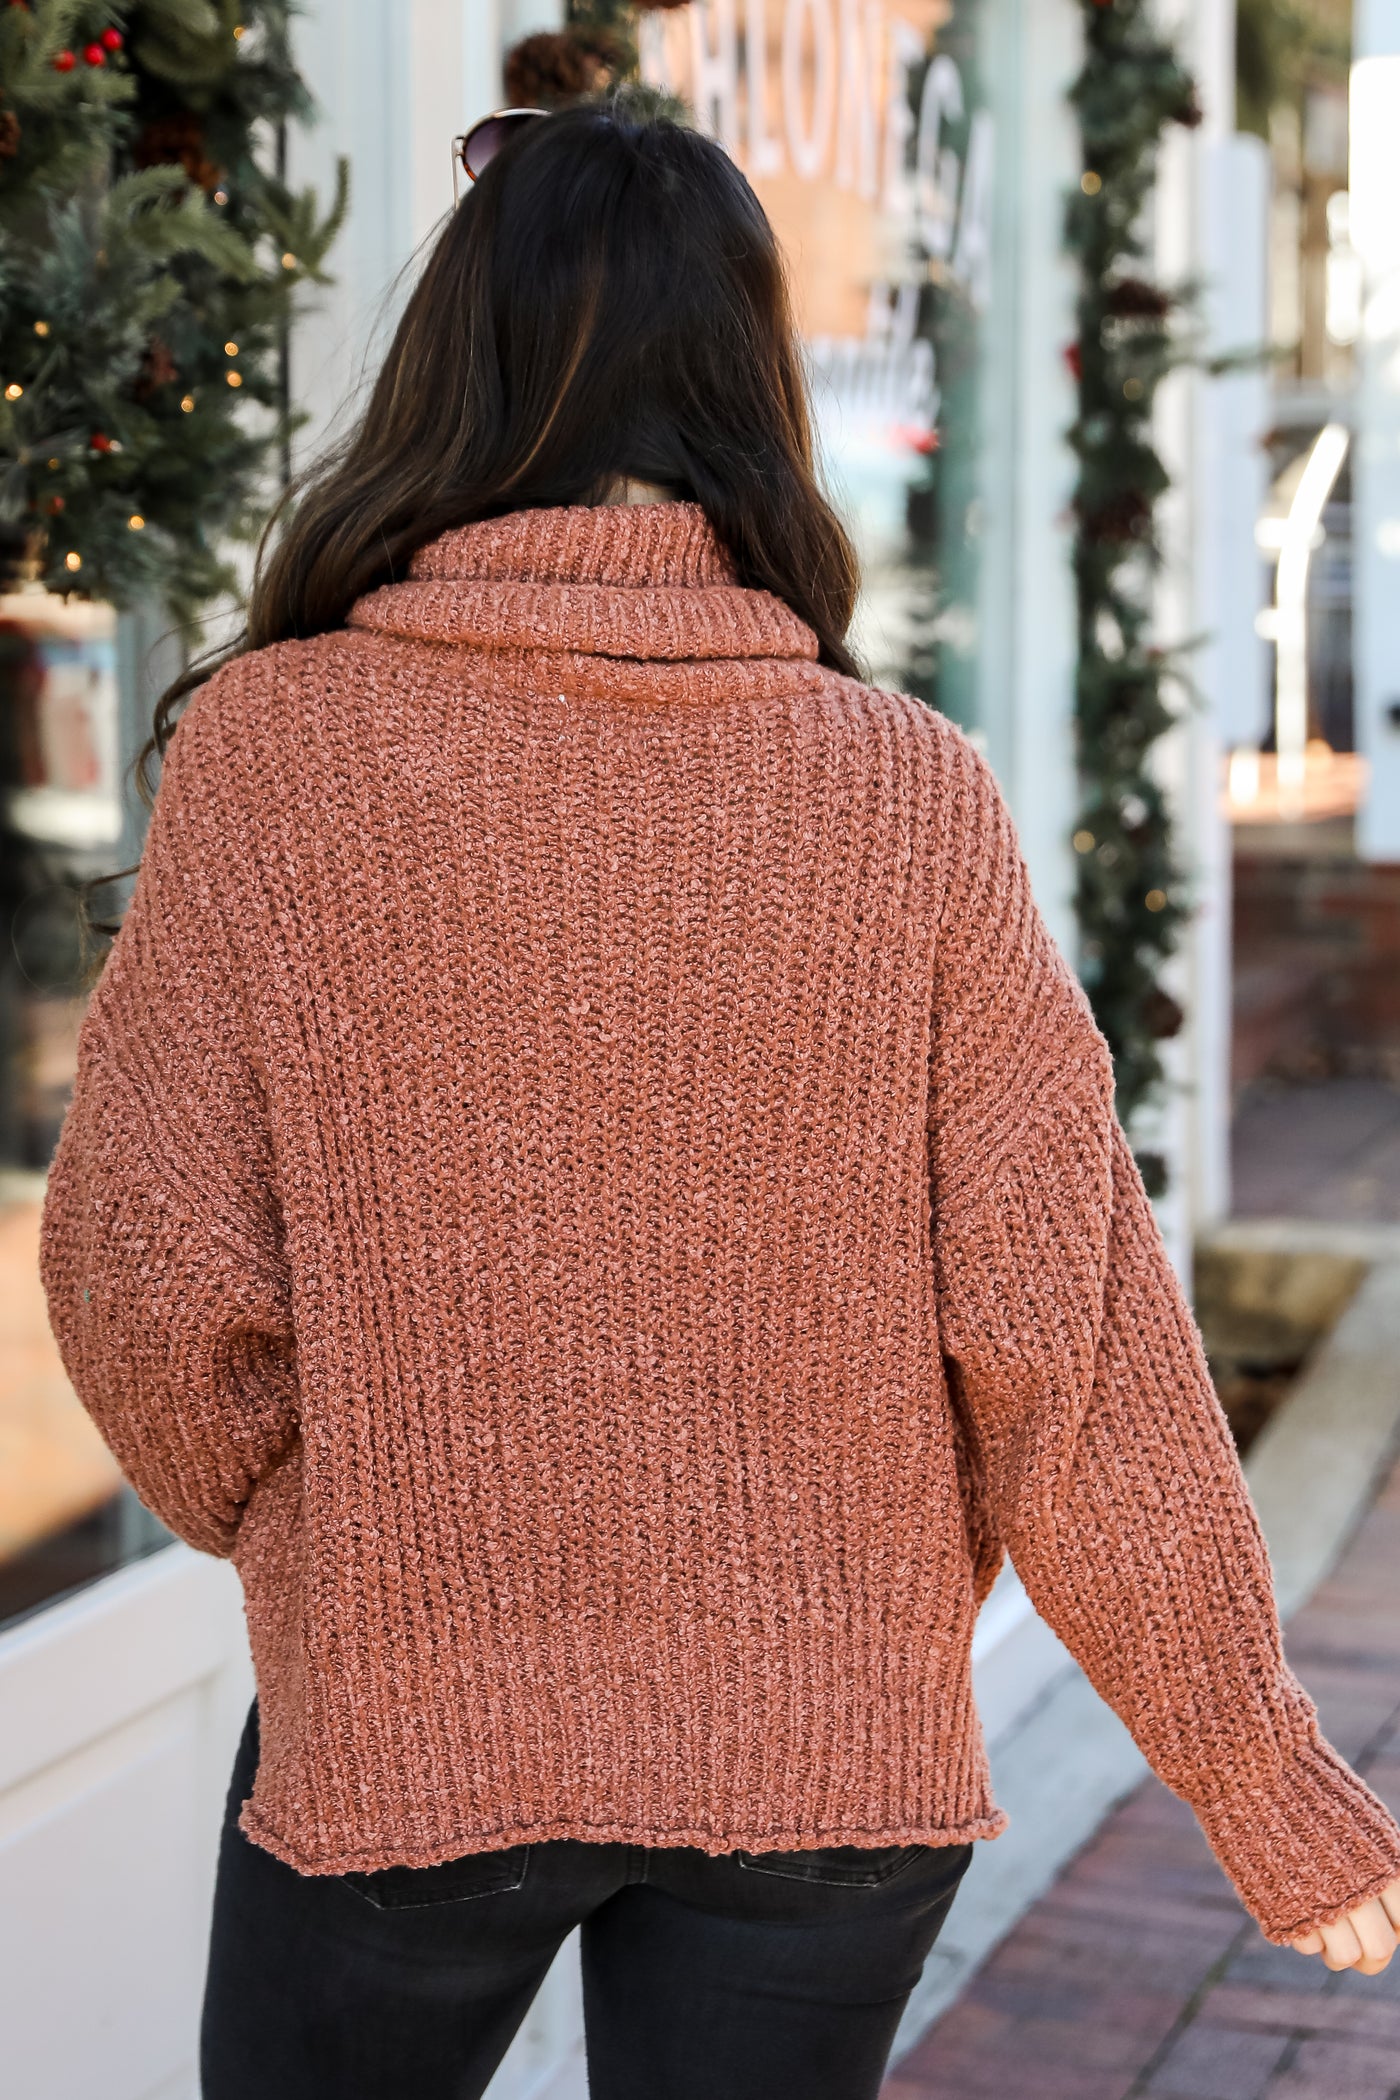 Turtleneck Sweater back view